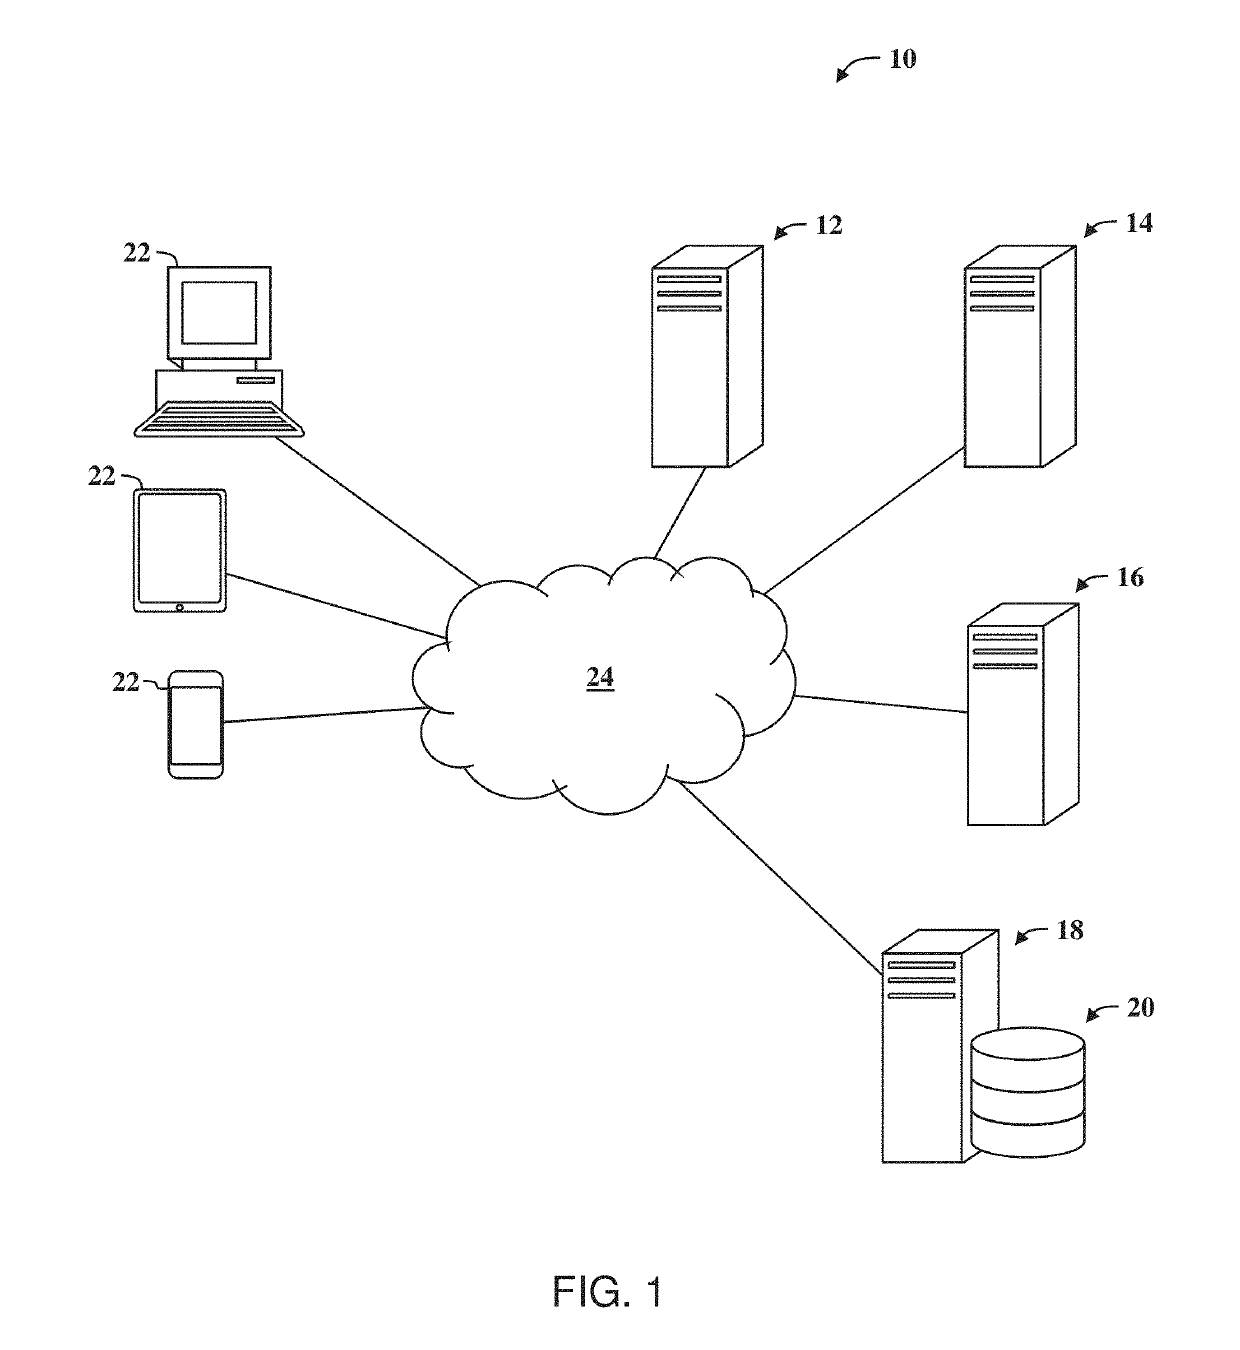 System, method, and non-transitory computer-readable storage media for displaying product information on websites